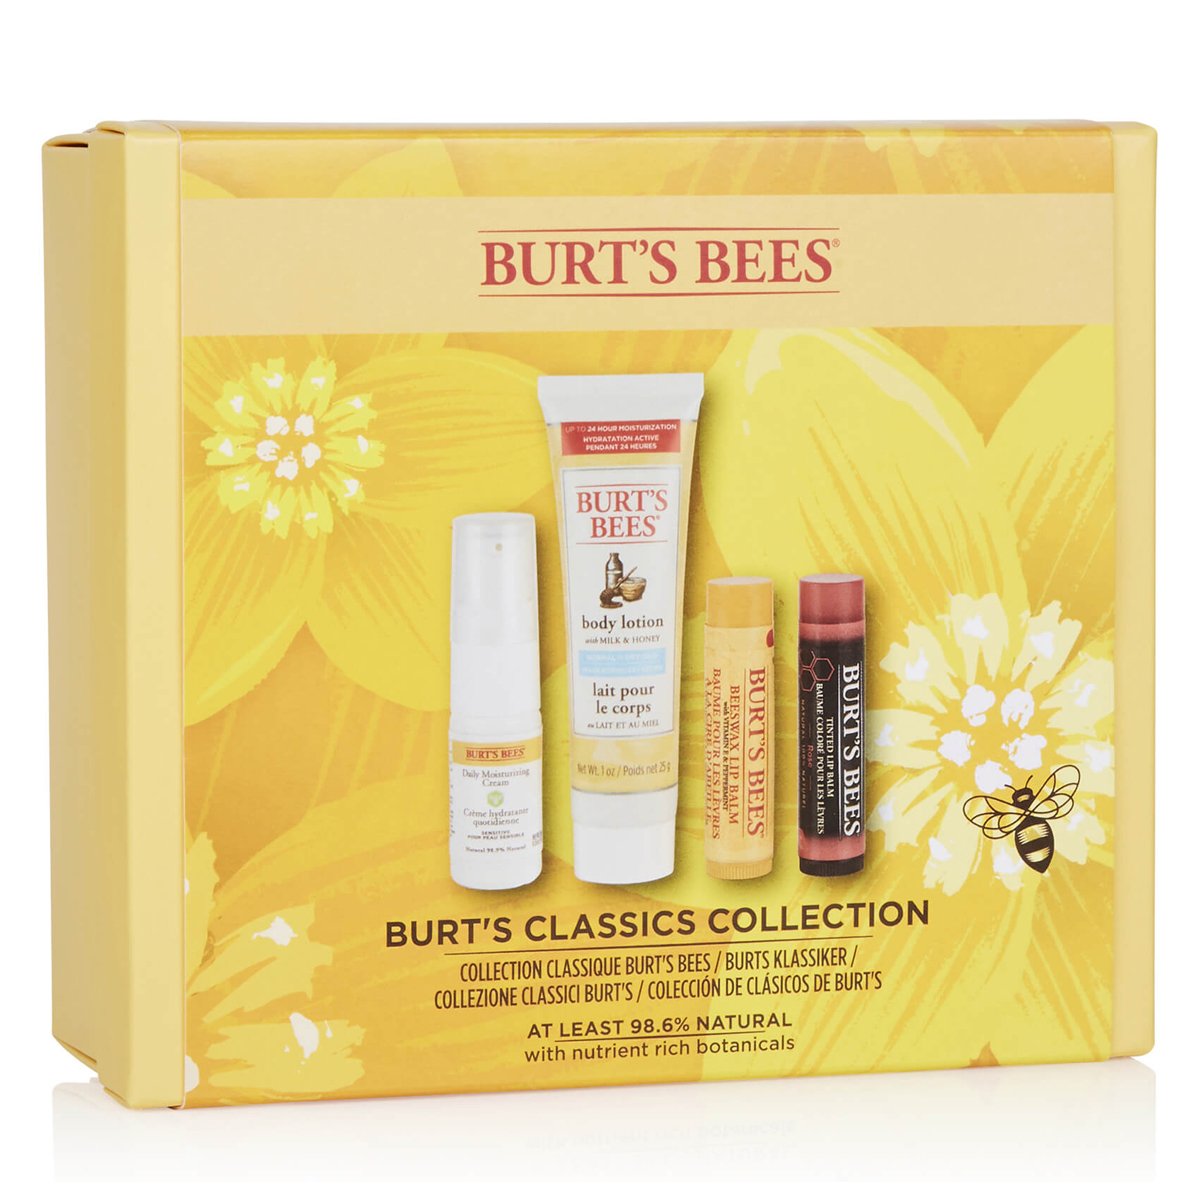 Burt's Bees Classics Collection Perennial Trial Kit